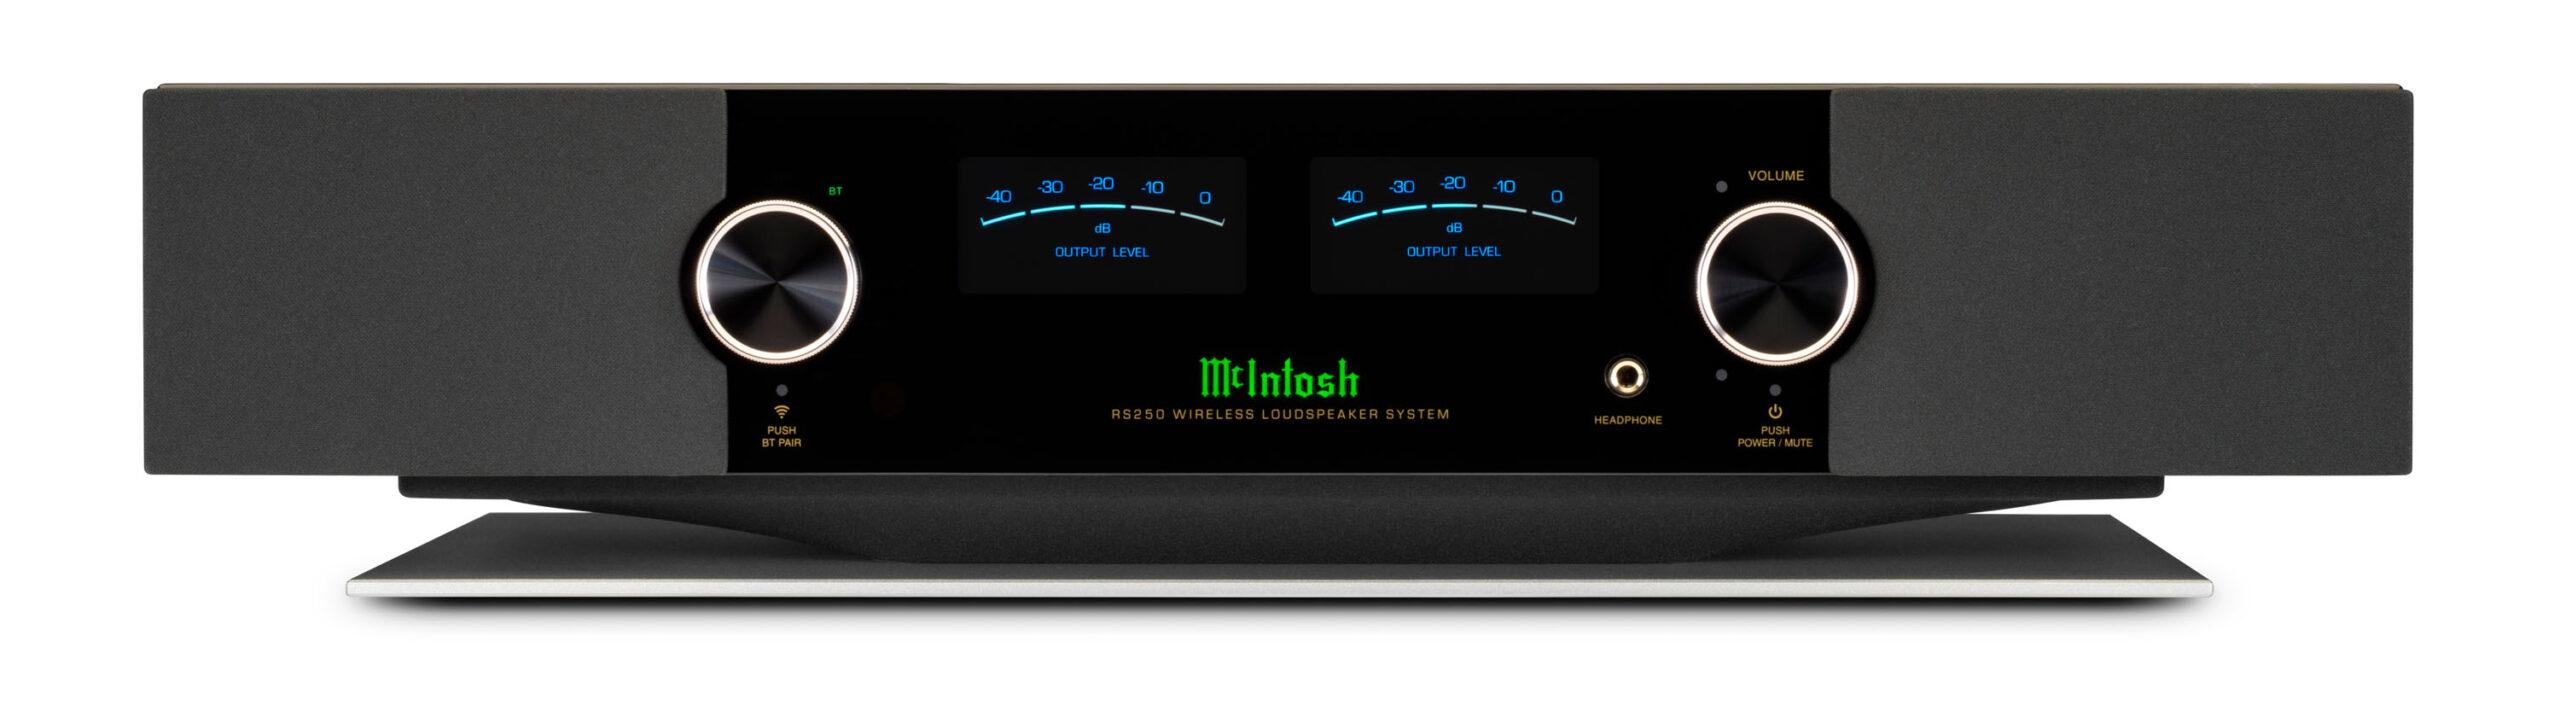 Two wireless speakers, the RS150 and RS250, offer streaming convenience with unmistakable McIntosh style, quality & performance. McIntosh e9234e85 rs250 front hi res scaled